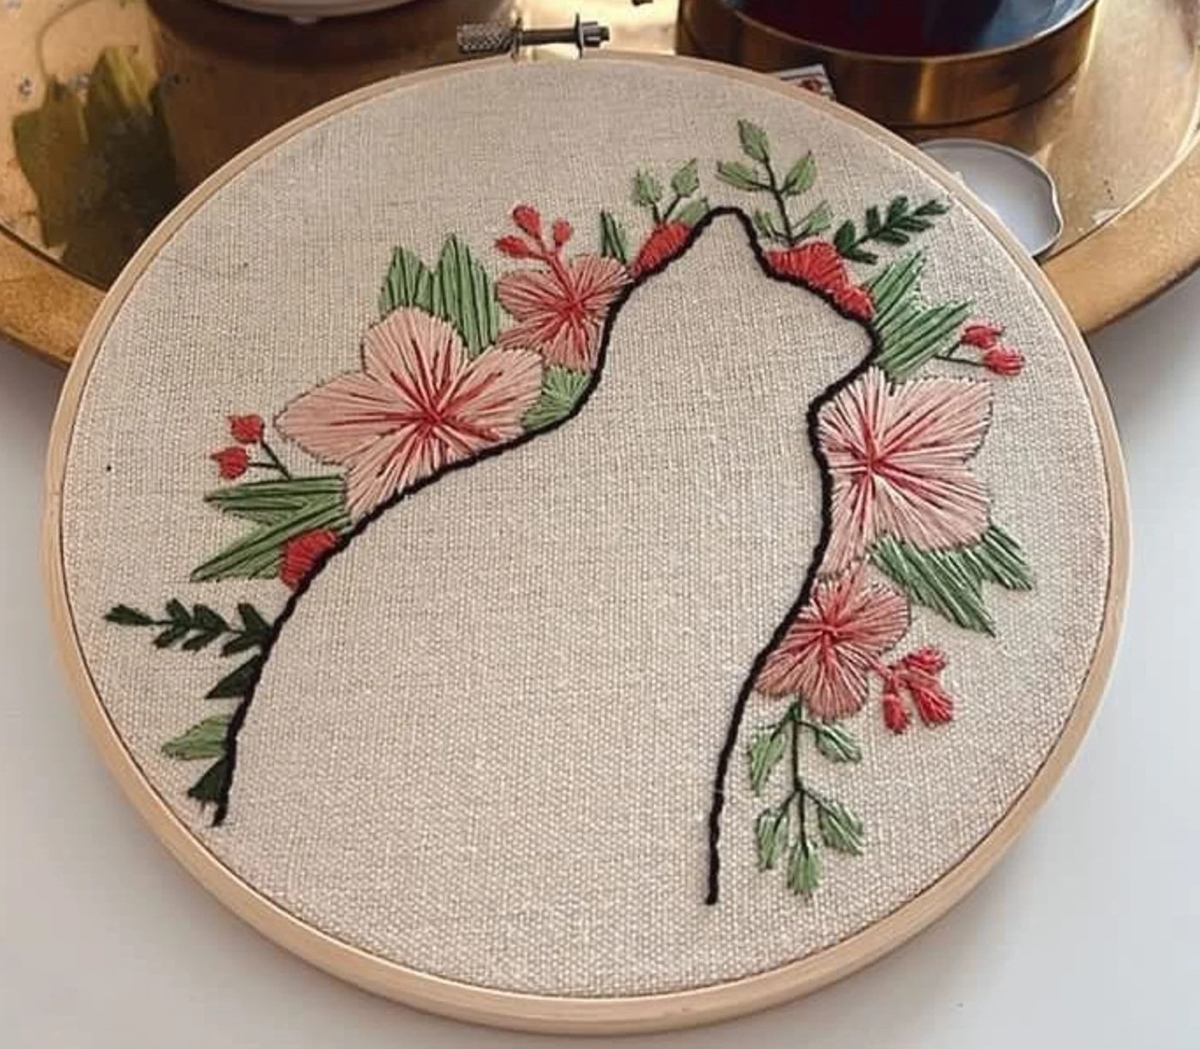 Embroidered cat silhouette with flowers